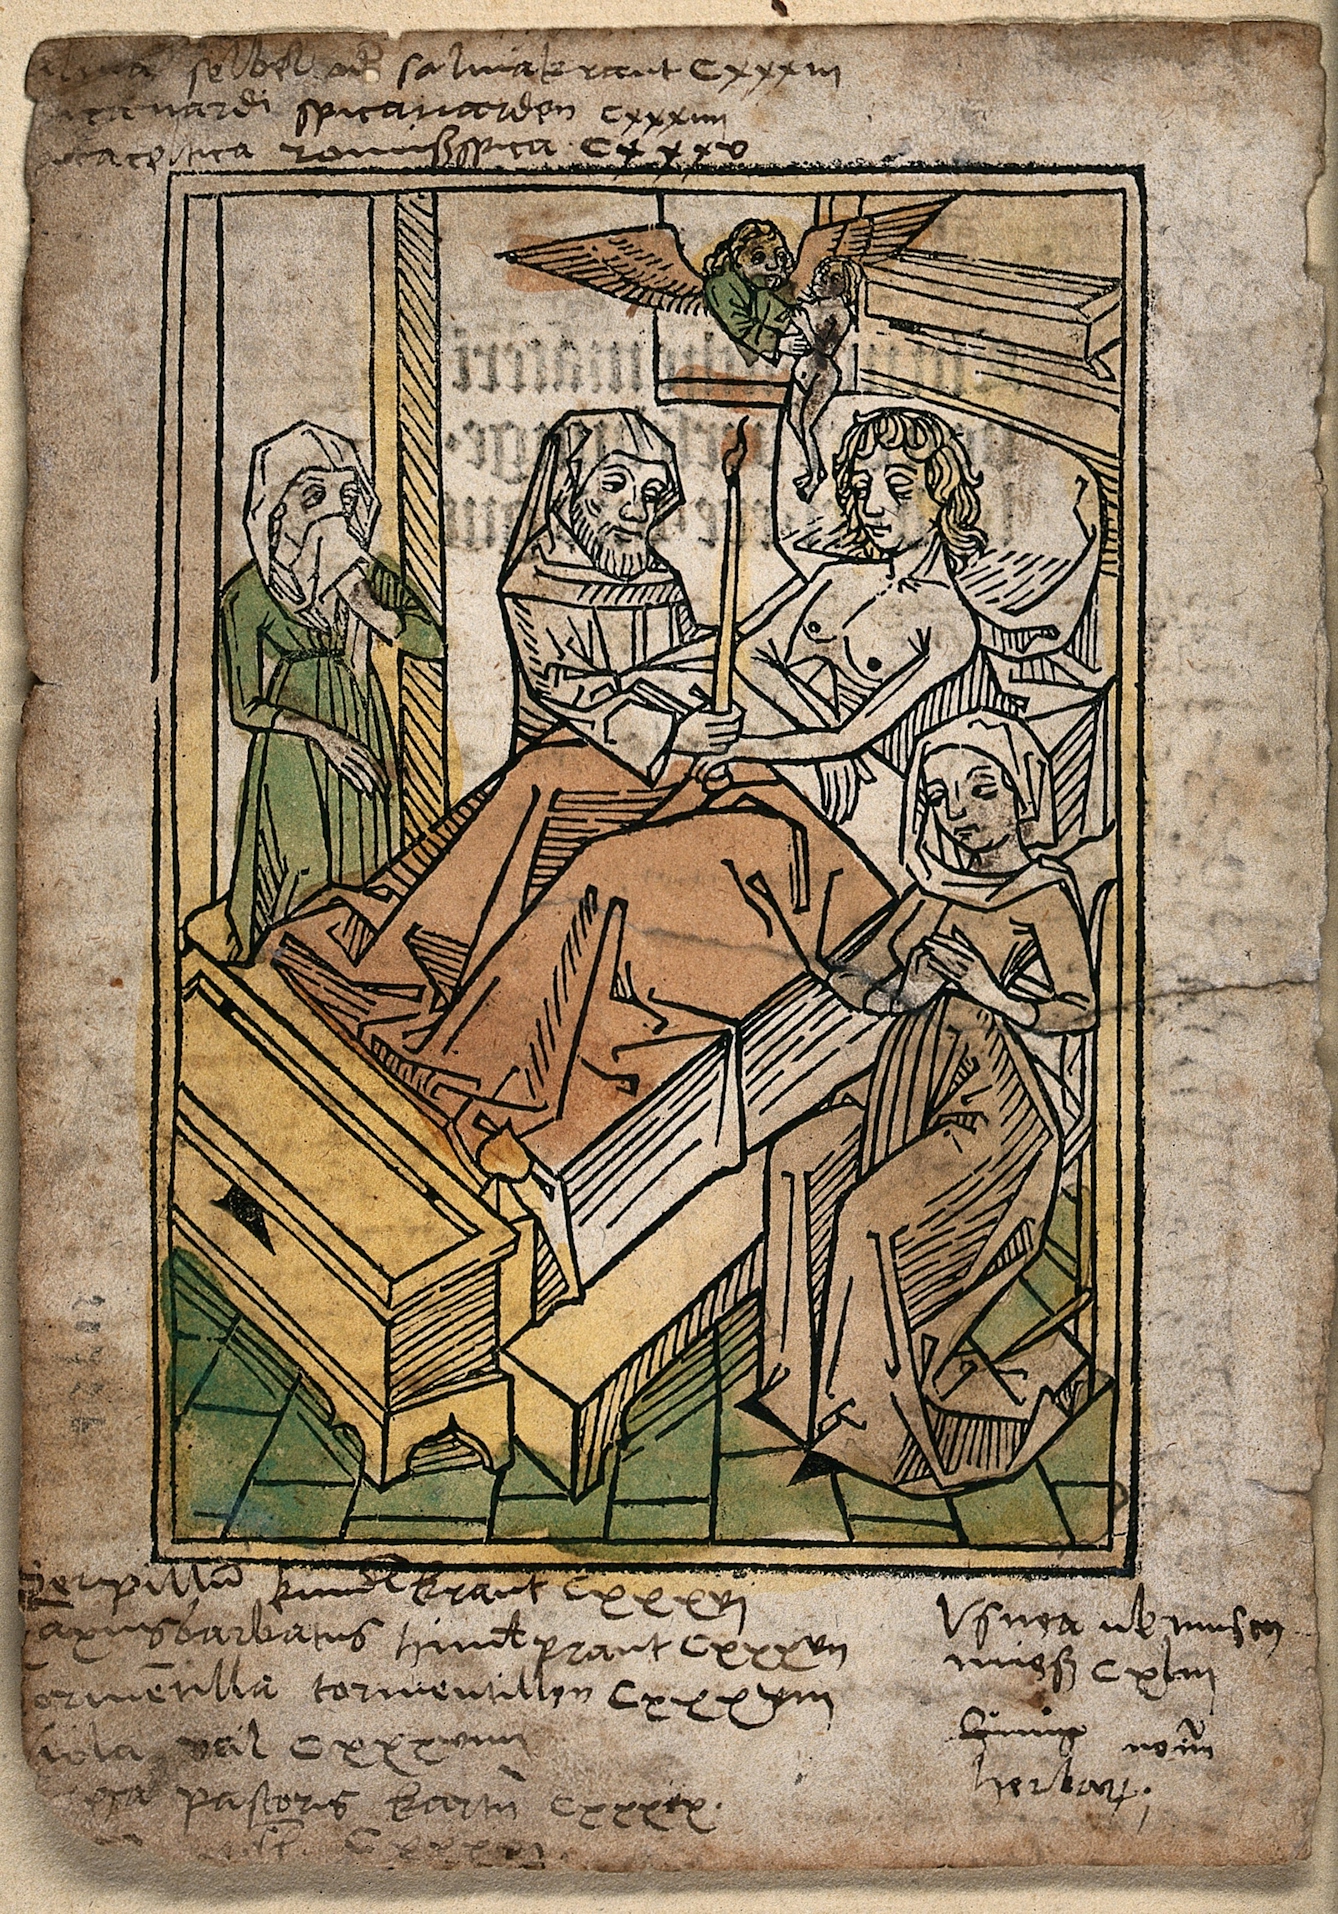 A woodcut image, showing a man lying in bed surrounded by a priest and two women.